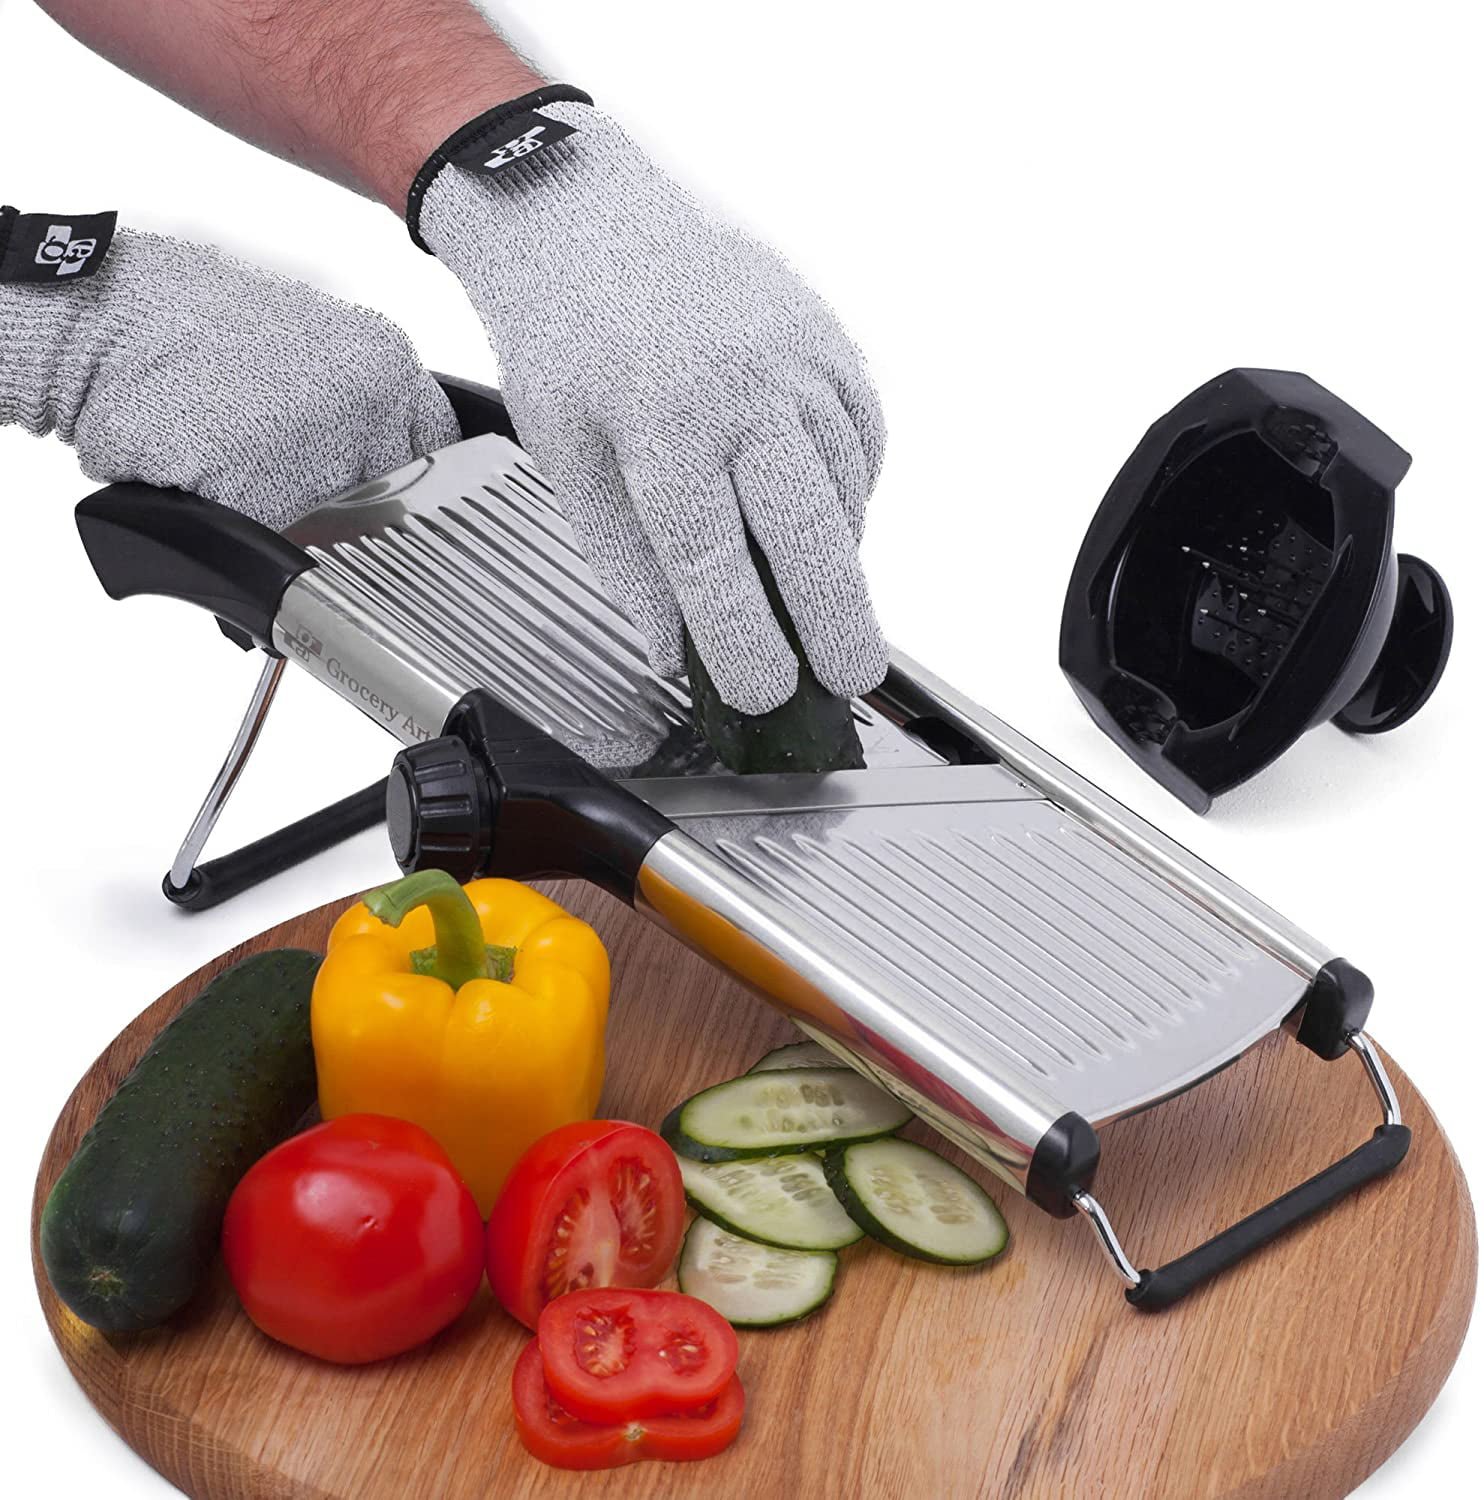 Mandoline Slicer with Cut-Resistant Gloves and Blade Guard